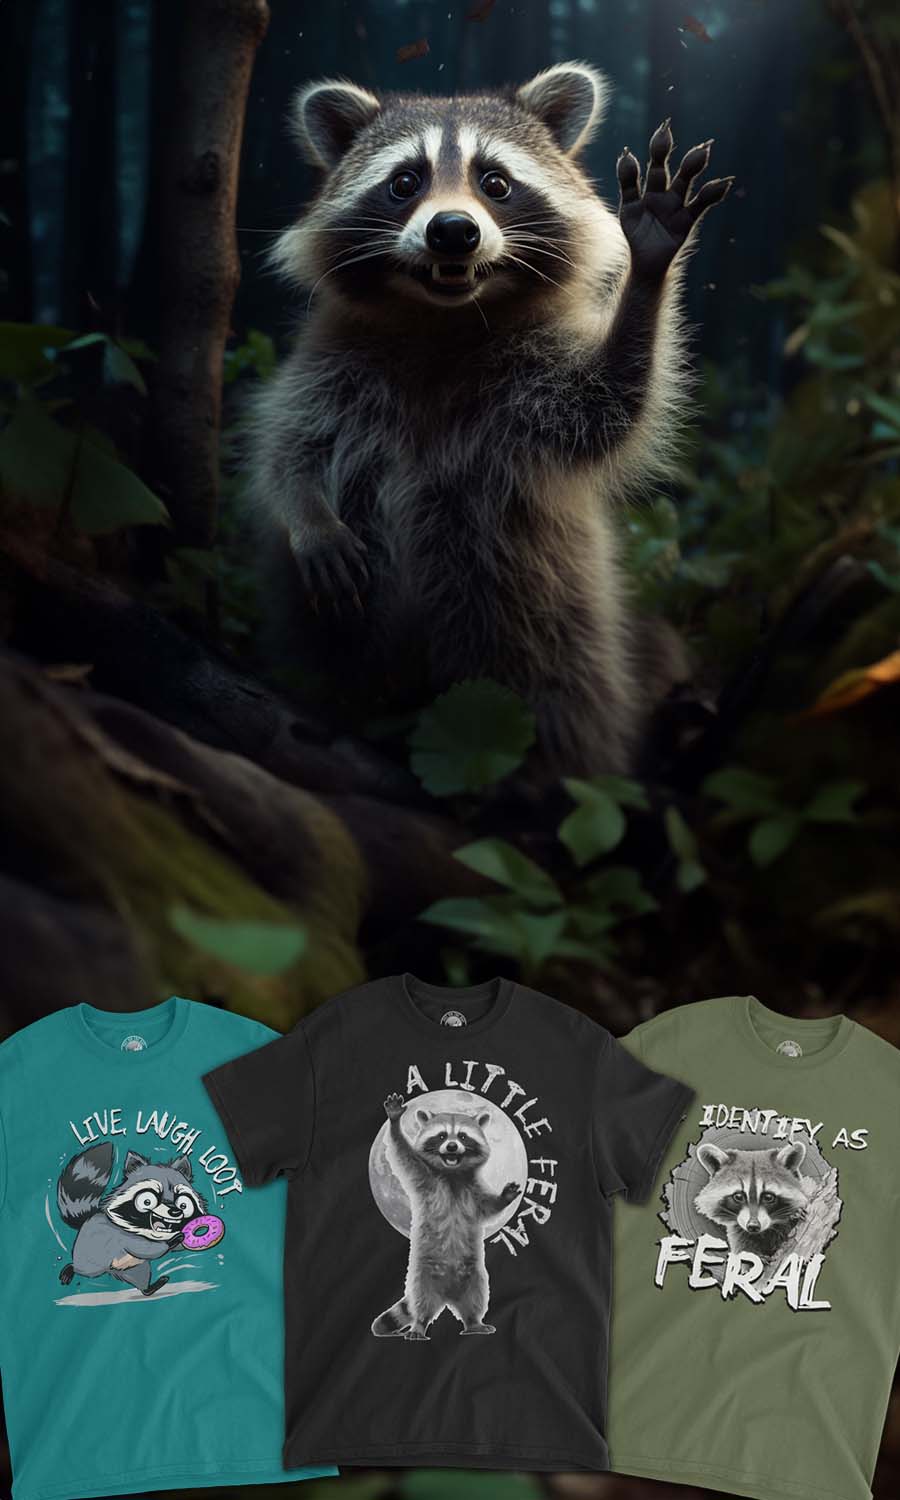 A raccoon waving with three shirts featuring raccoons